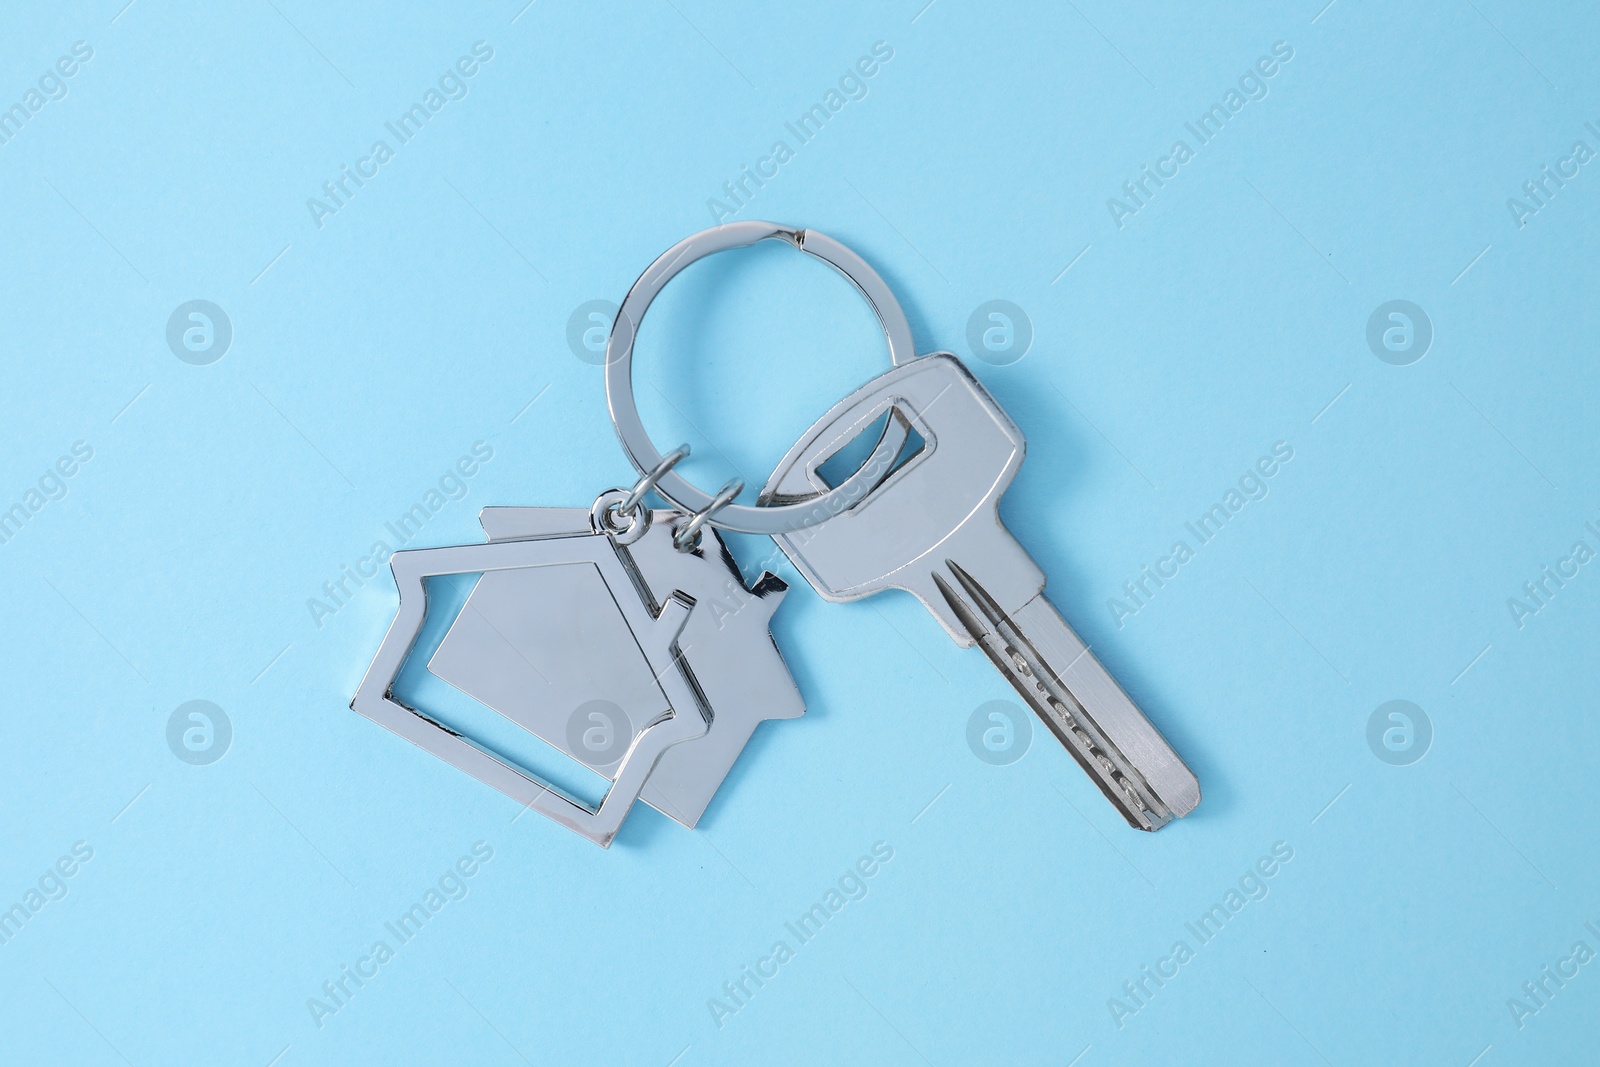 Photo of Key with keychain in shape of house on light blue background, top view